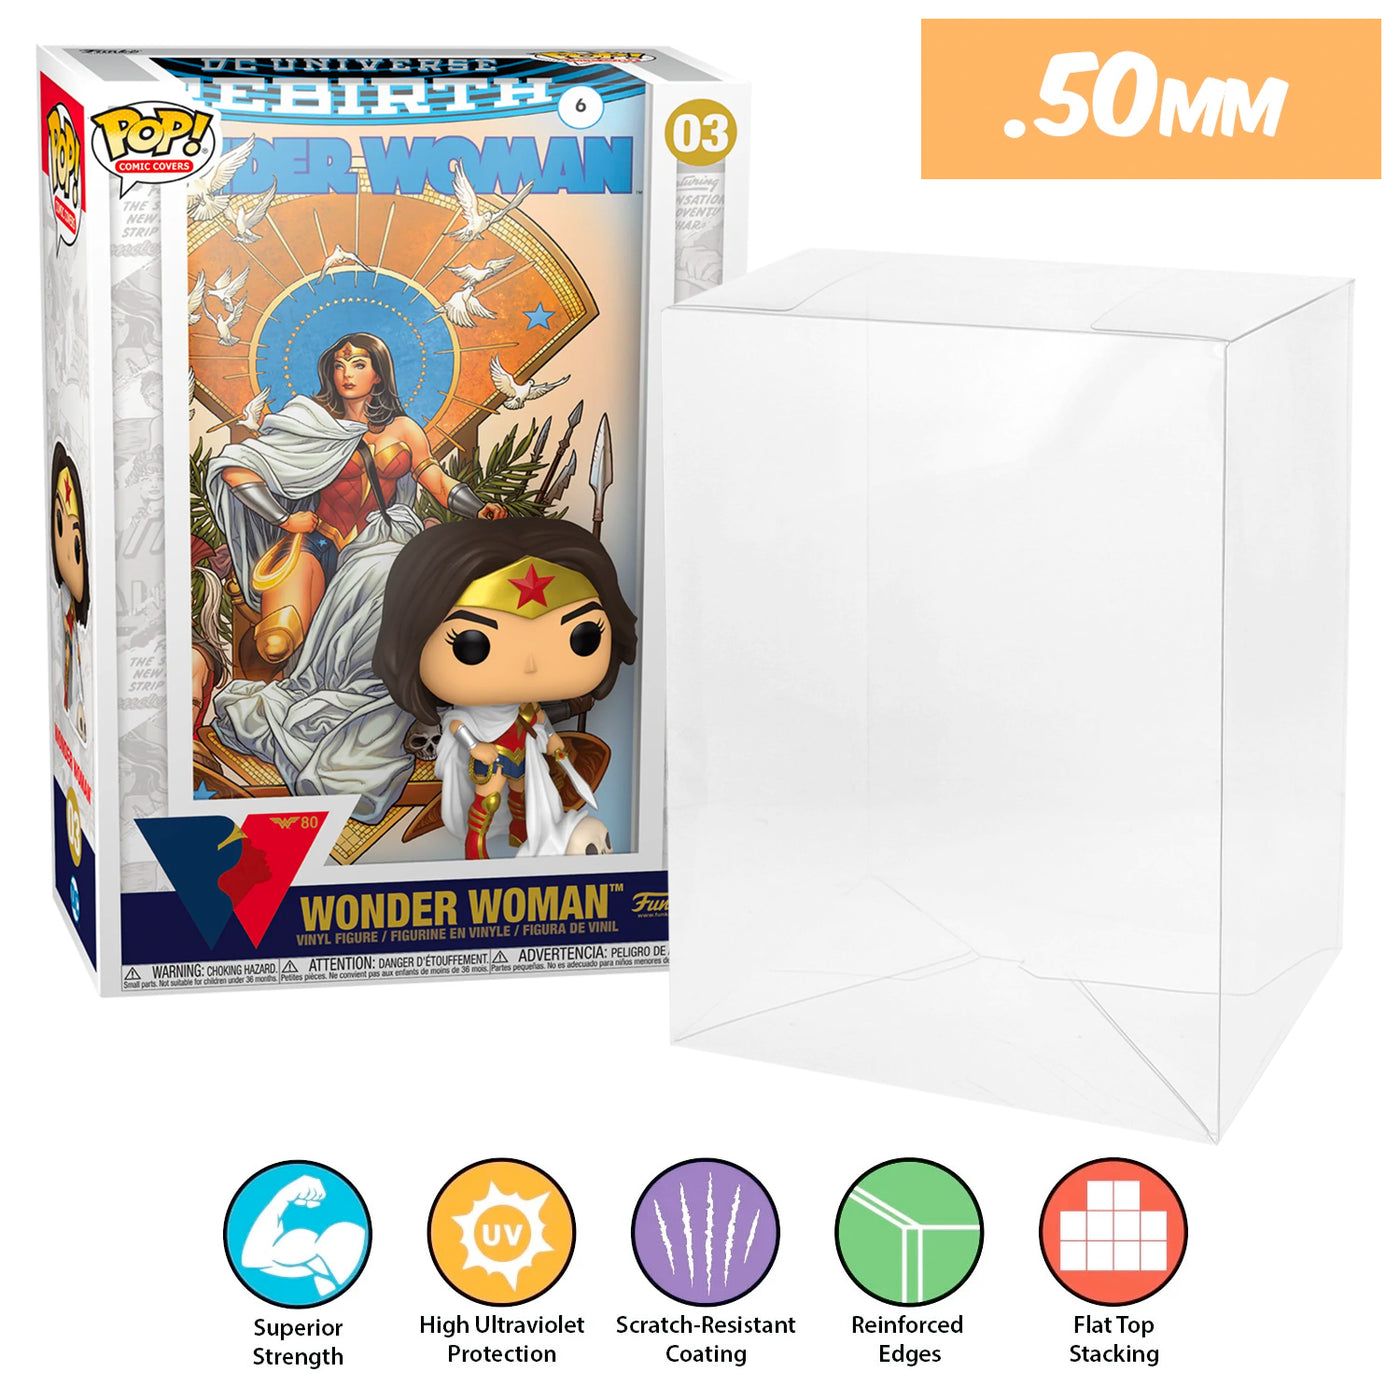 dc wonder woman rebirth pop comic covers best funko pop protectors thick strong uv scratch flat top stack vinyl display geek plastic shield vaulted eco armor fits collect protect display case kollector protector